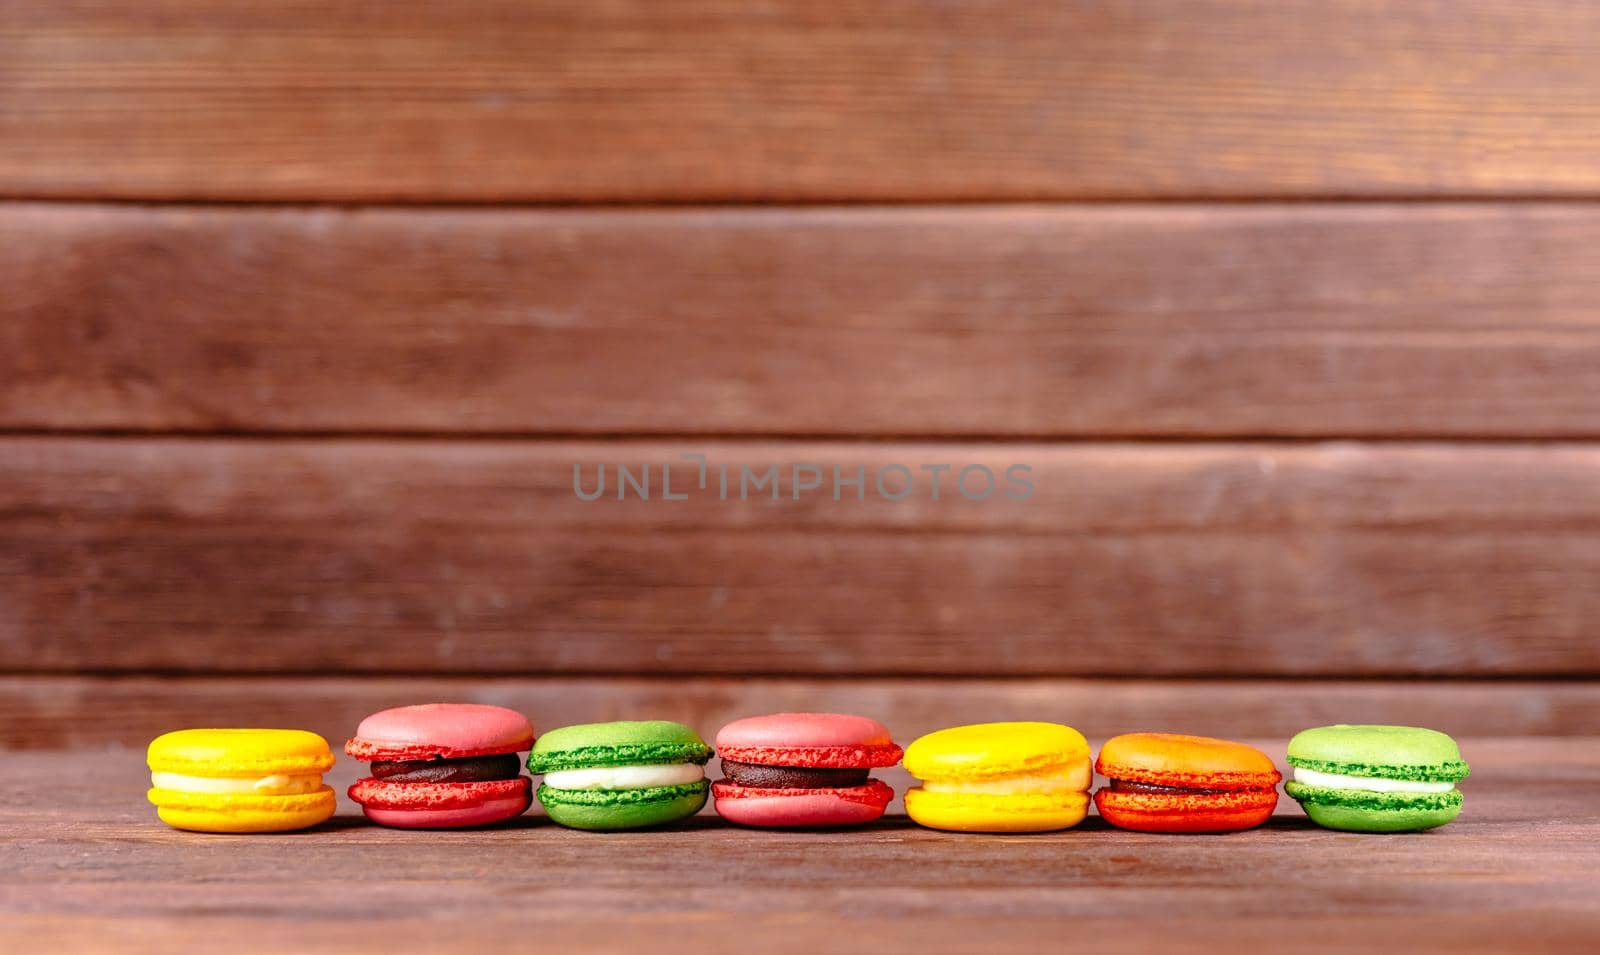 Colorful sweet macarons dessert in a row on wooden table. Copy-space in upper part of image.